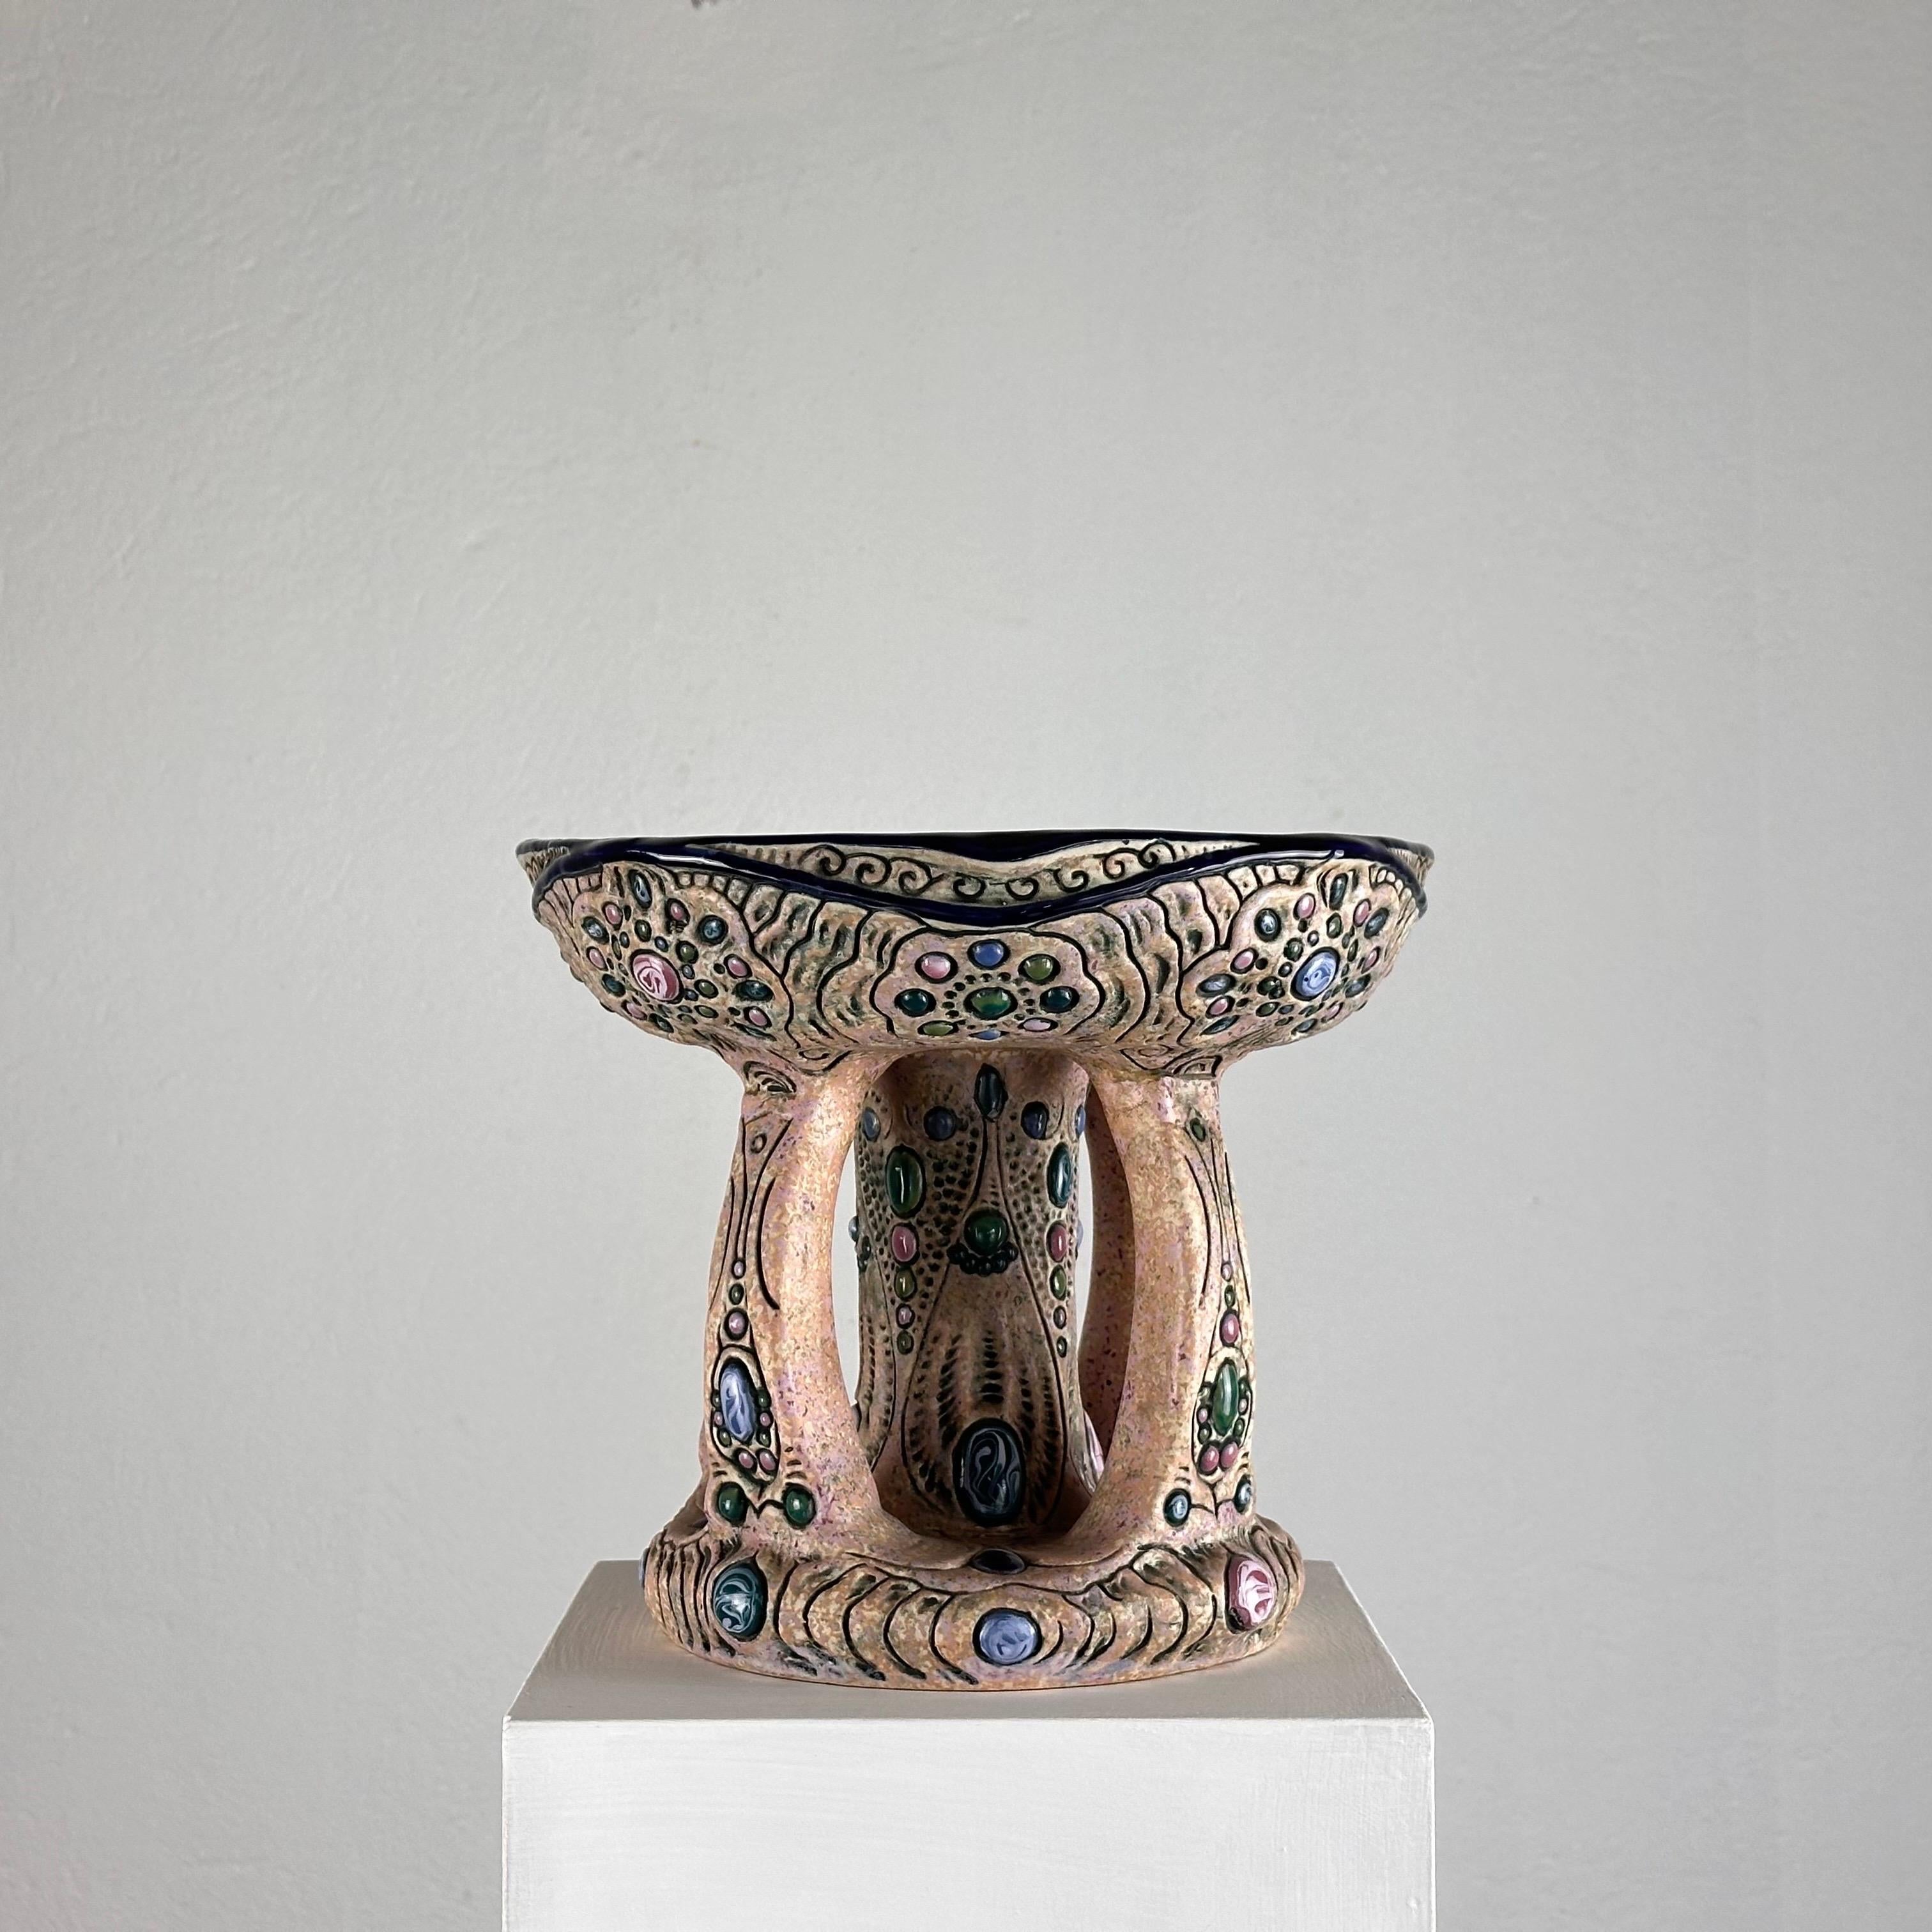 A stunning hand-painted ceramic riser hailing from the renowned Amphora Czech workshops. Crafted with precision and adorned with exquisite hand-painted gem accents, this riser exudes opulence and timeless elegance.

Dating back to the 1930s, this